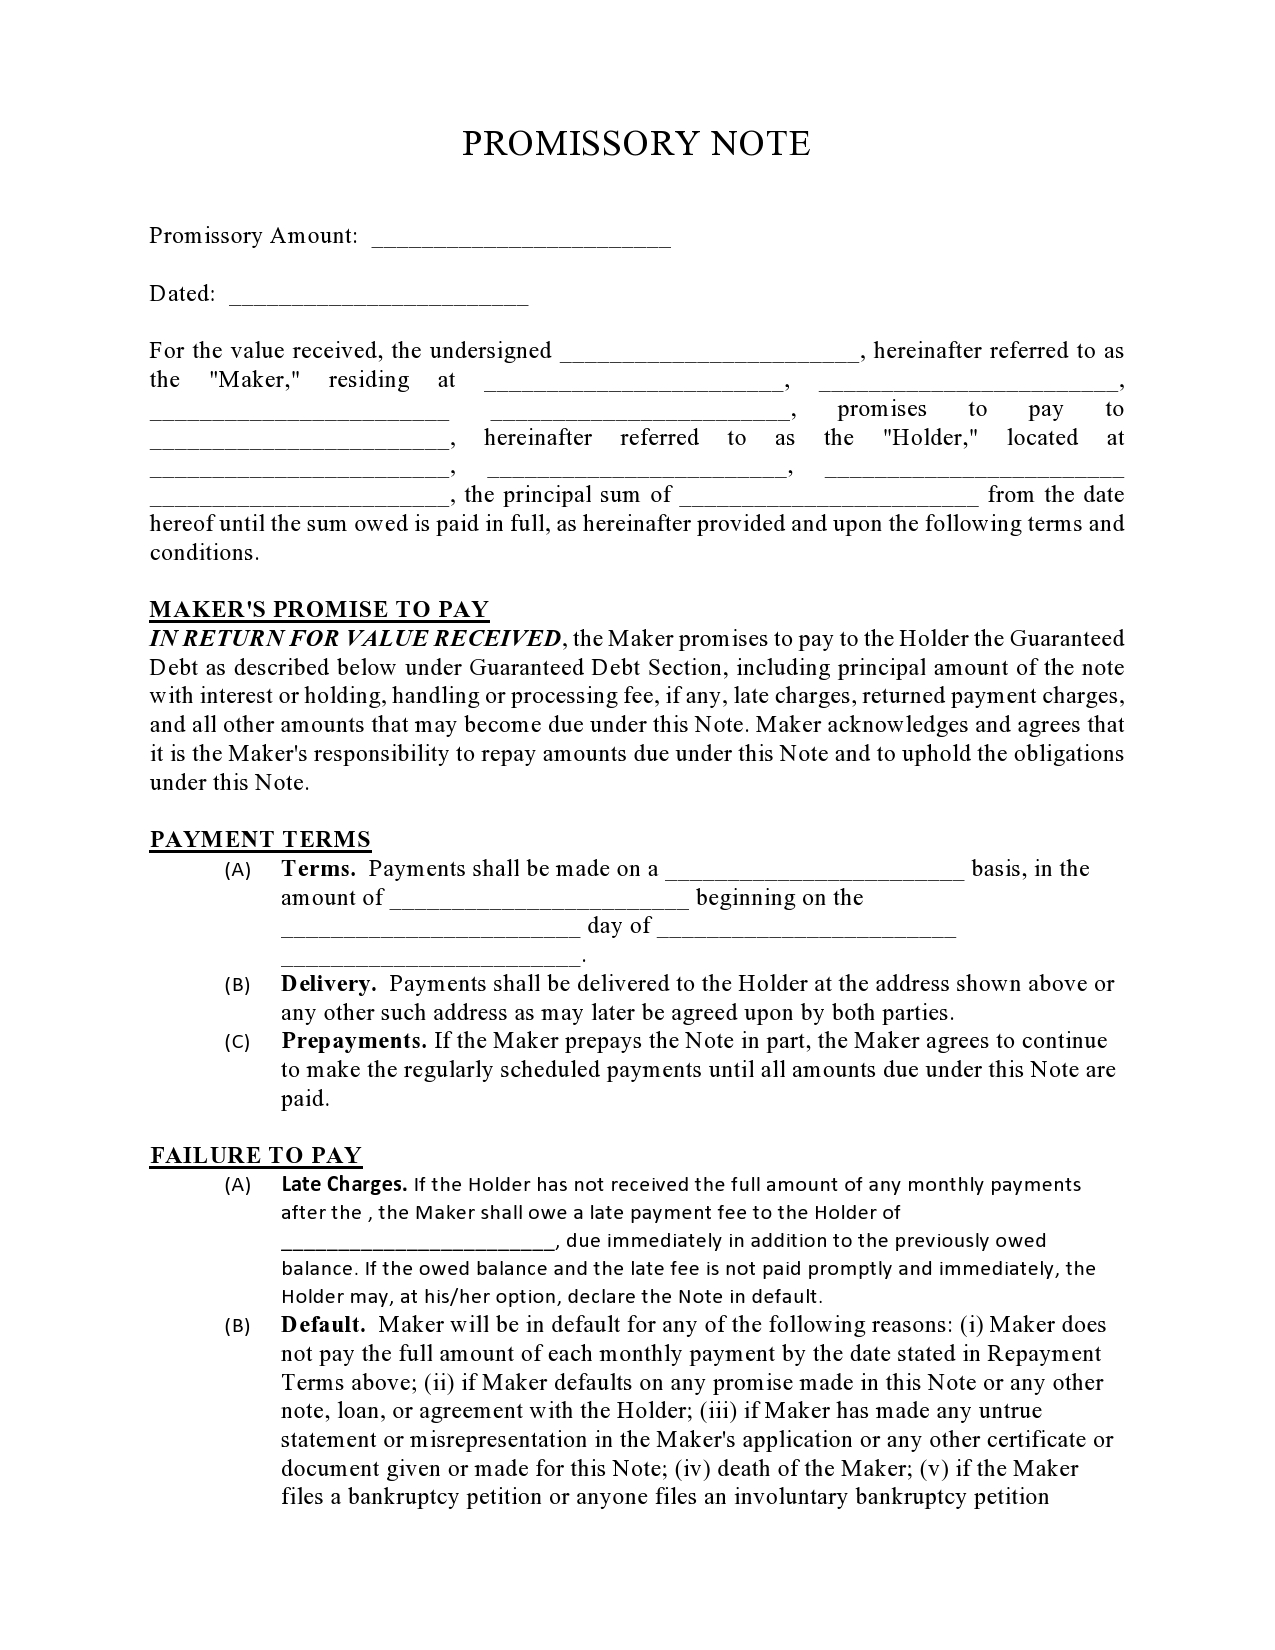 Free promissory note template 06